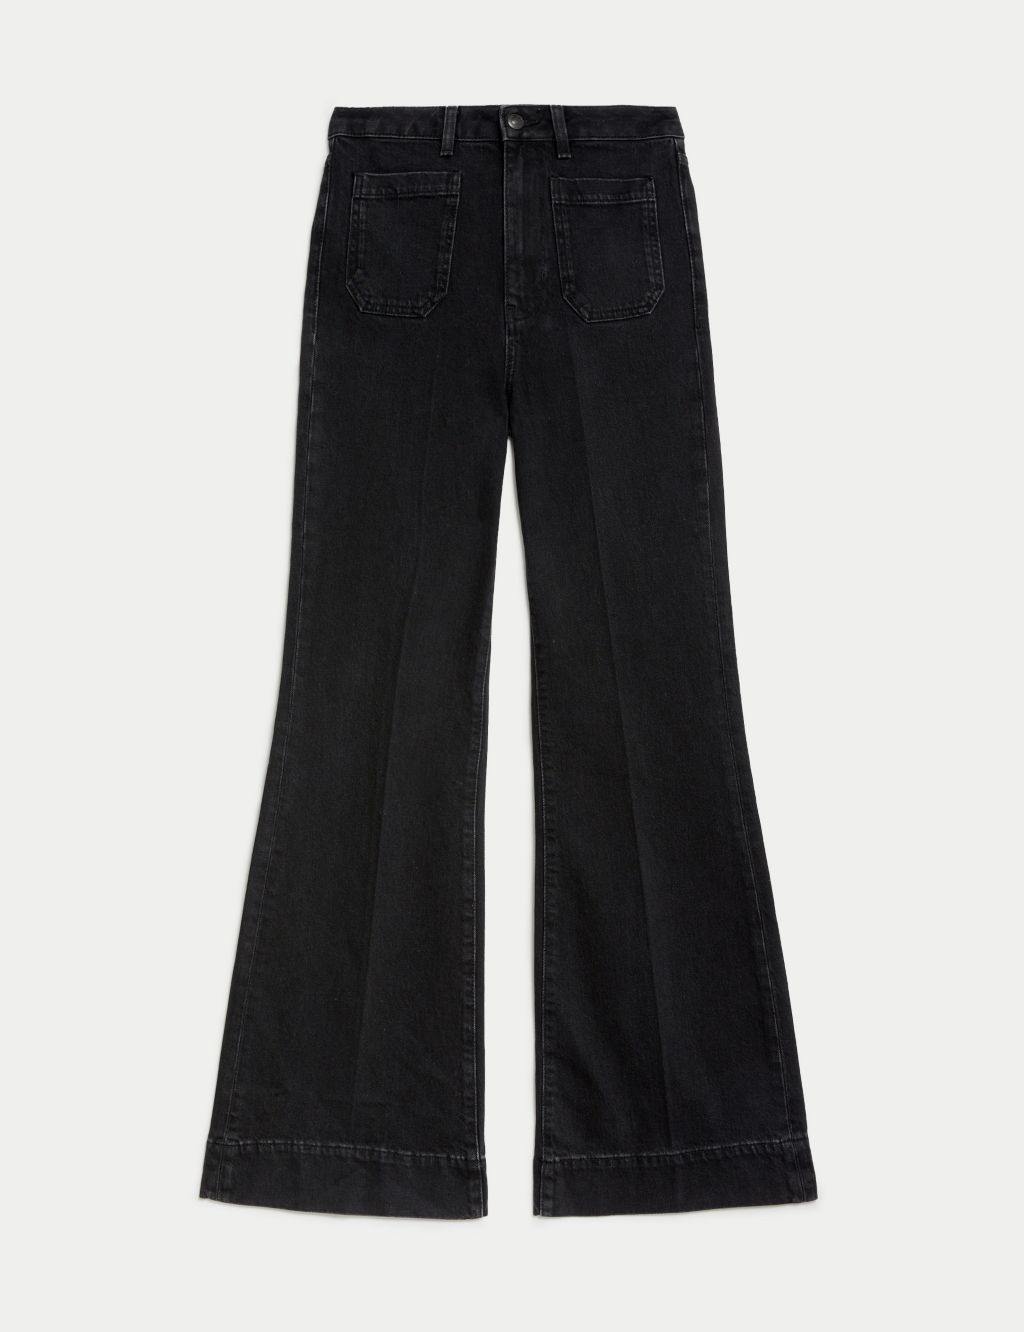 High-Waisted Built-In Tough Black-Wash Flare Jeans for Girls